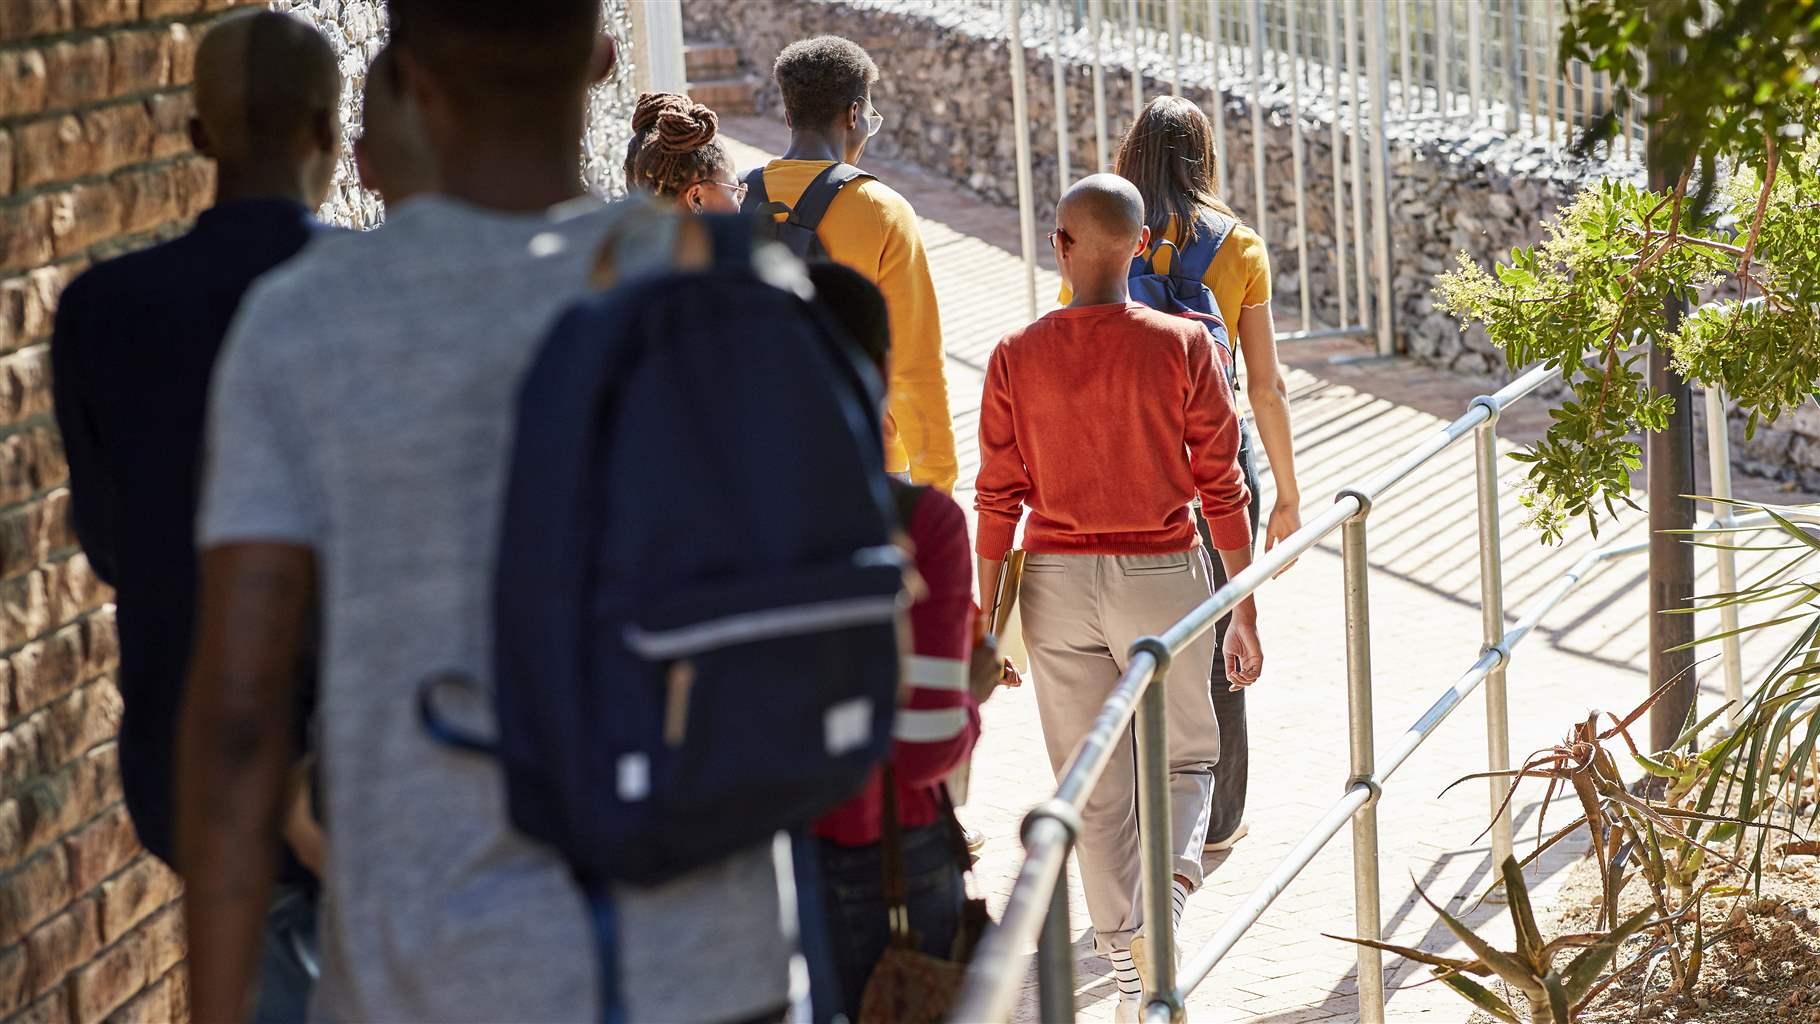 Multiethnic students wearing backpacks are shown from behind, walking on a footpath next to a brick building.